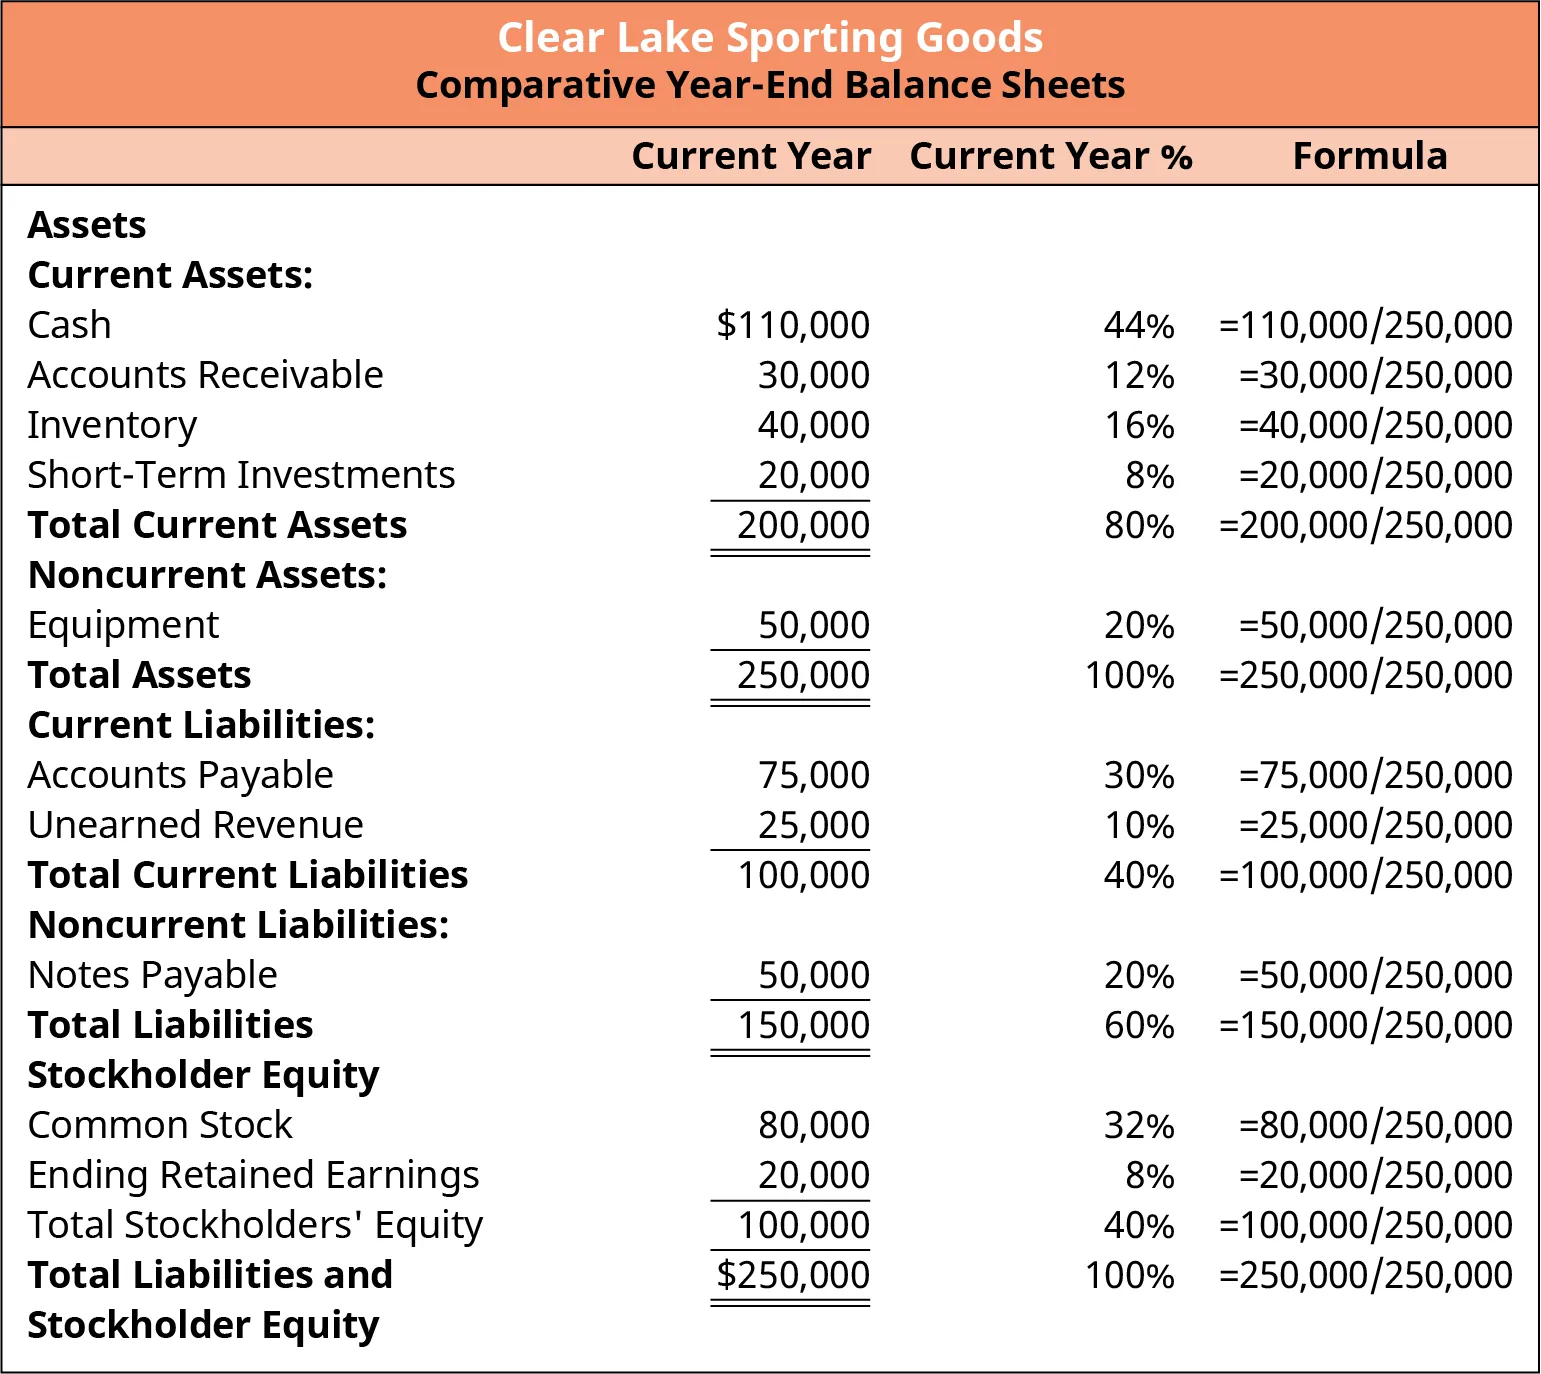 Comparative year-end balance sheets for Clear Lake Sporting Good’s shows the current year amounts, current year percentage, and formula for assets, liabilities, and stockholder equity. For example, Accounts receivable ($30,000) is divided by the Total Liabilities and Equity figure ($250,000) to derive 12% of the current year’s total.